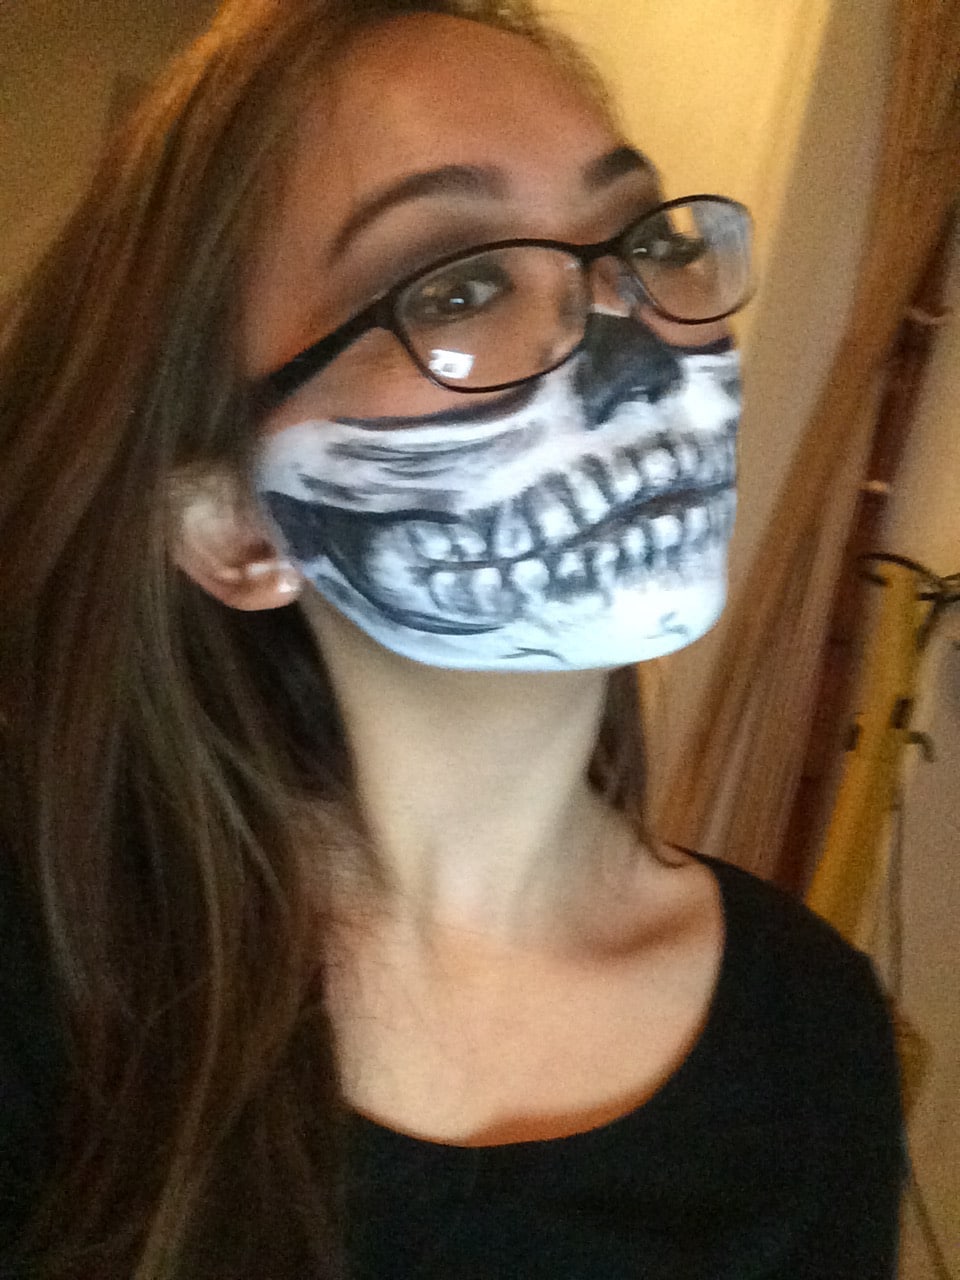 Halloween makeup test with skeleton face